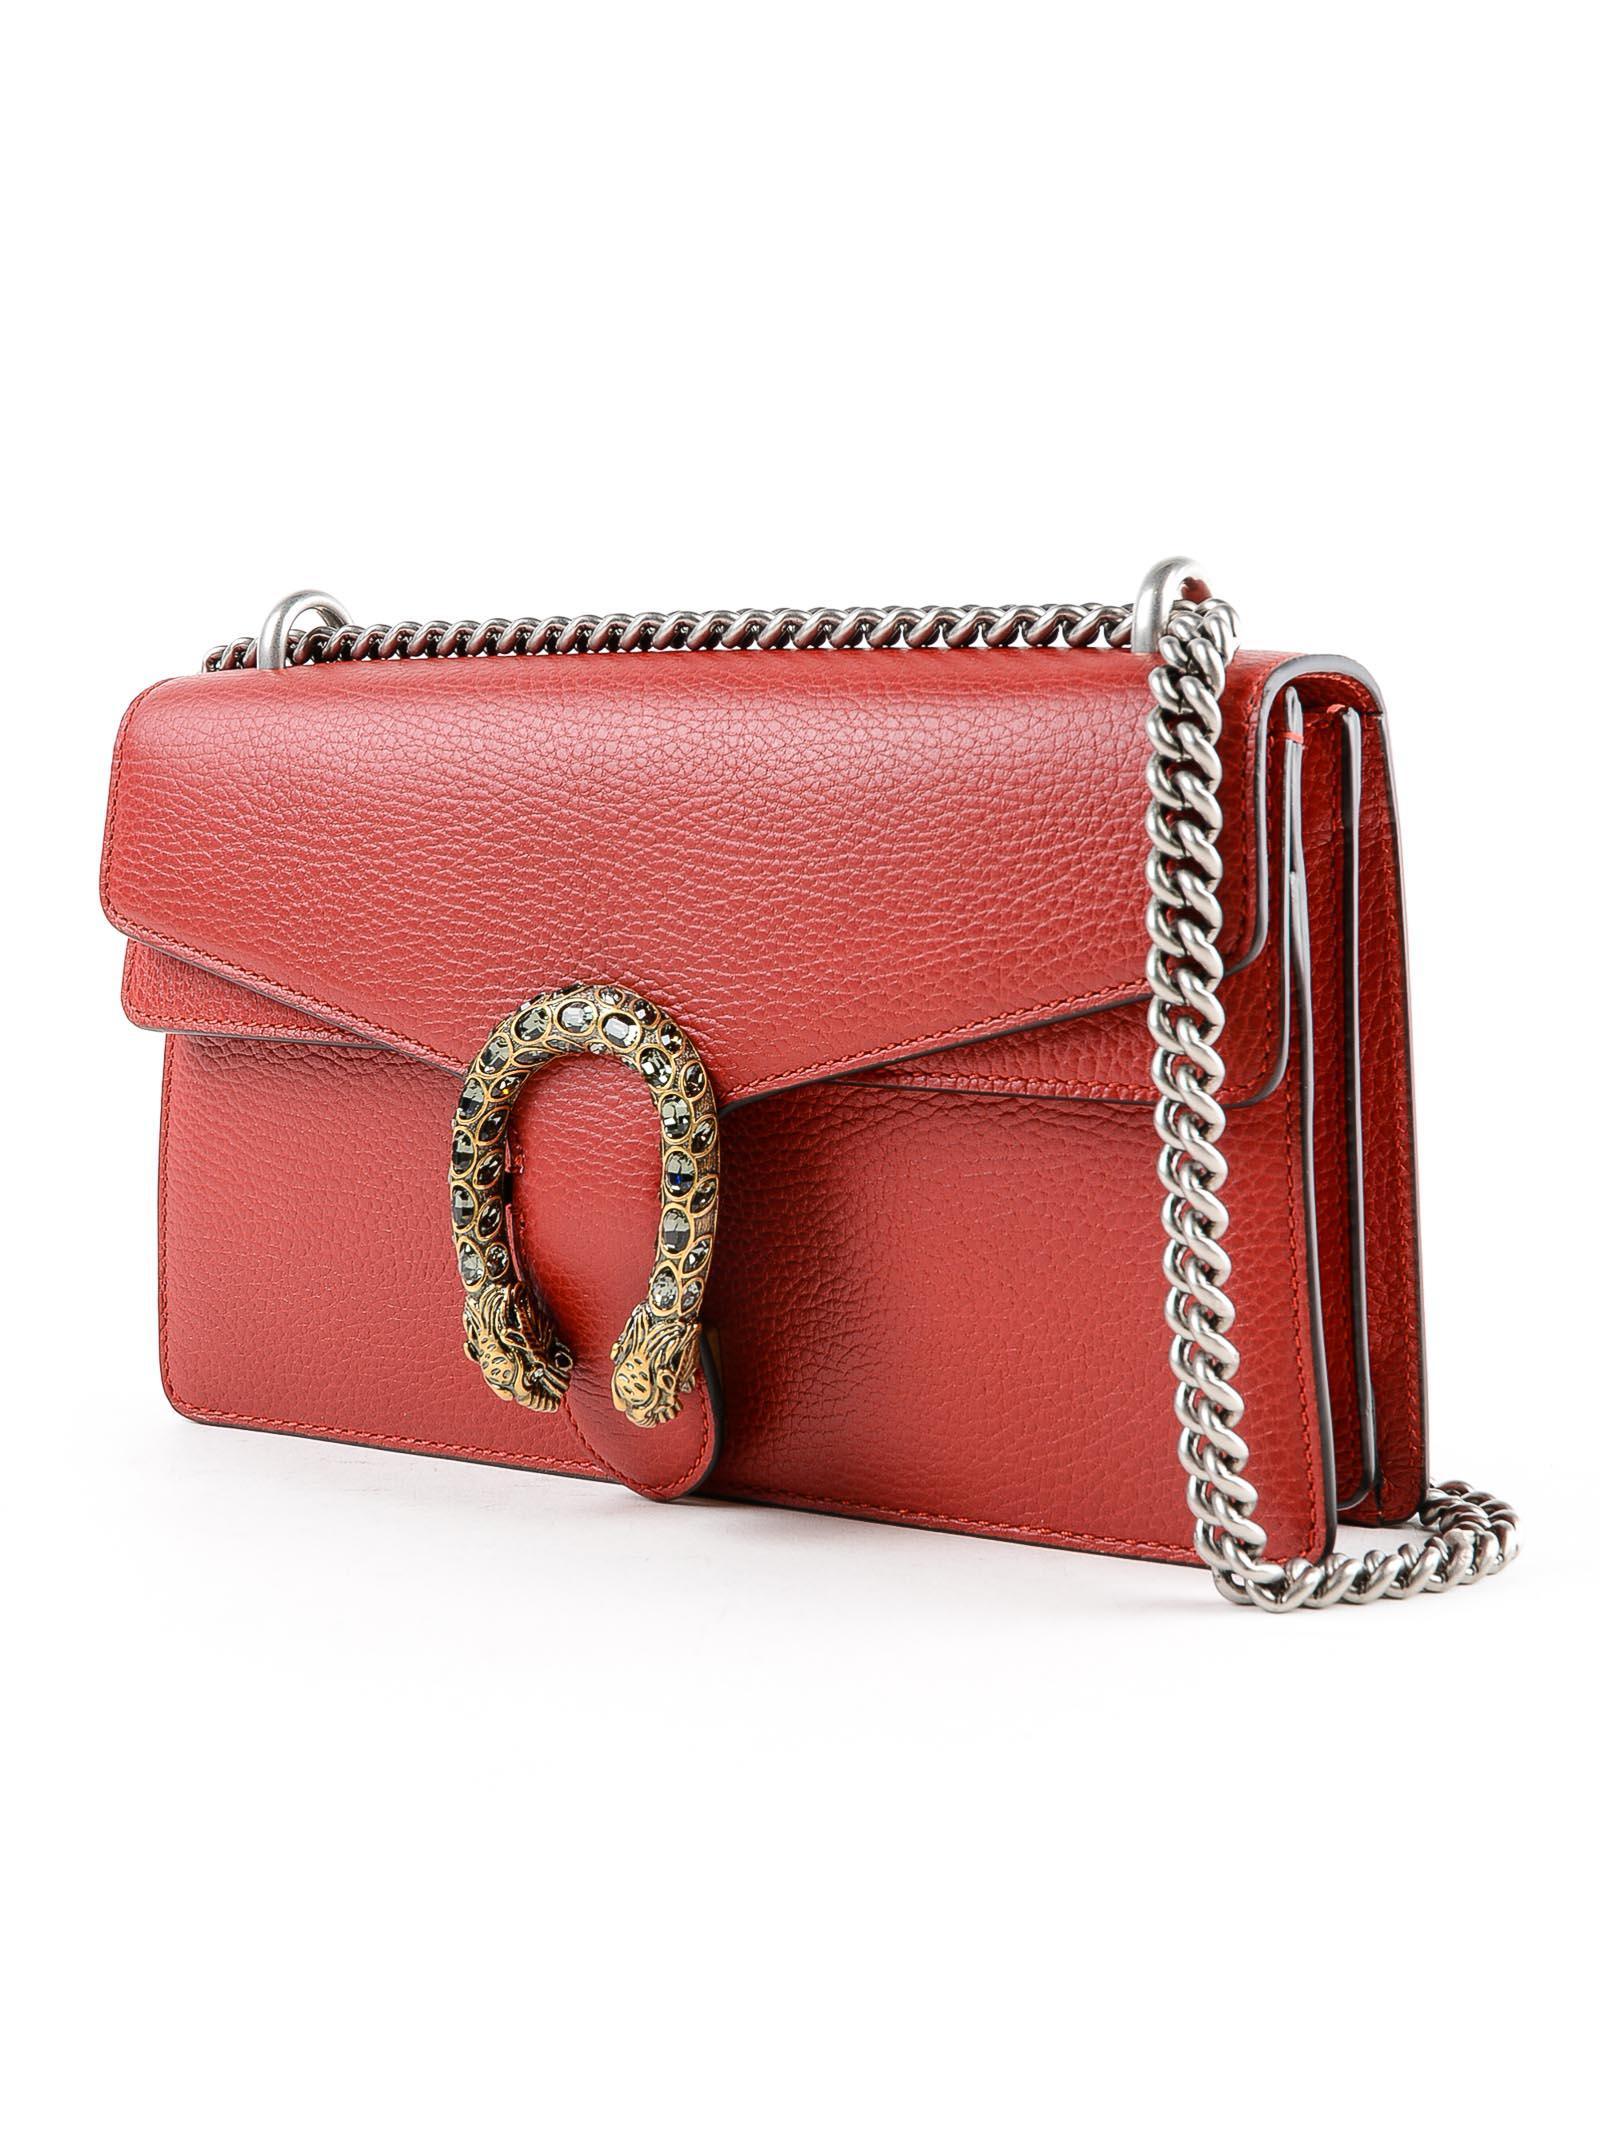 Gucci Dionysus Leather Shoulder Bag in Red - Lyst